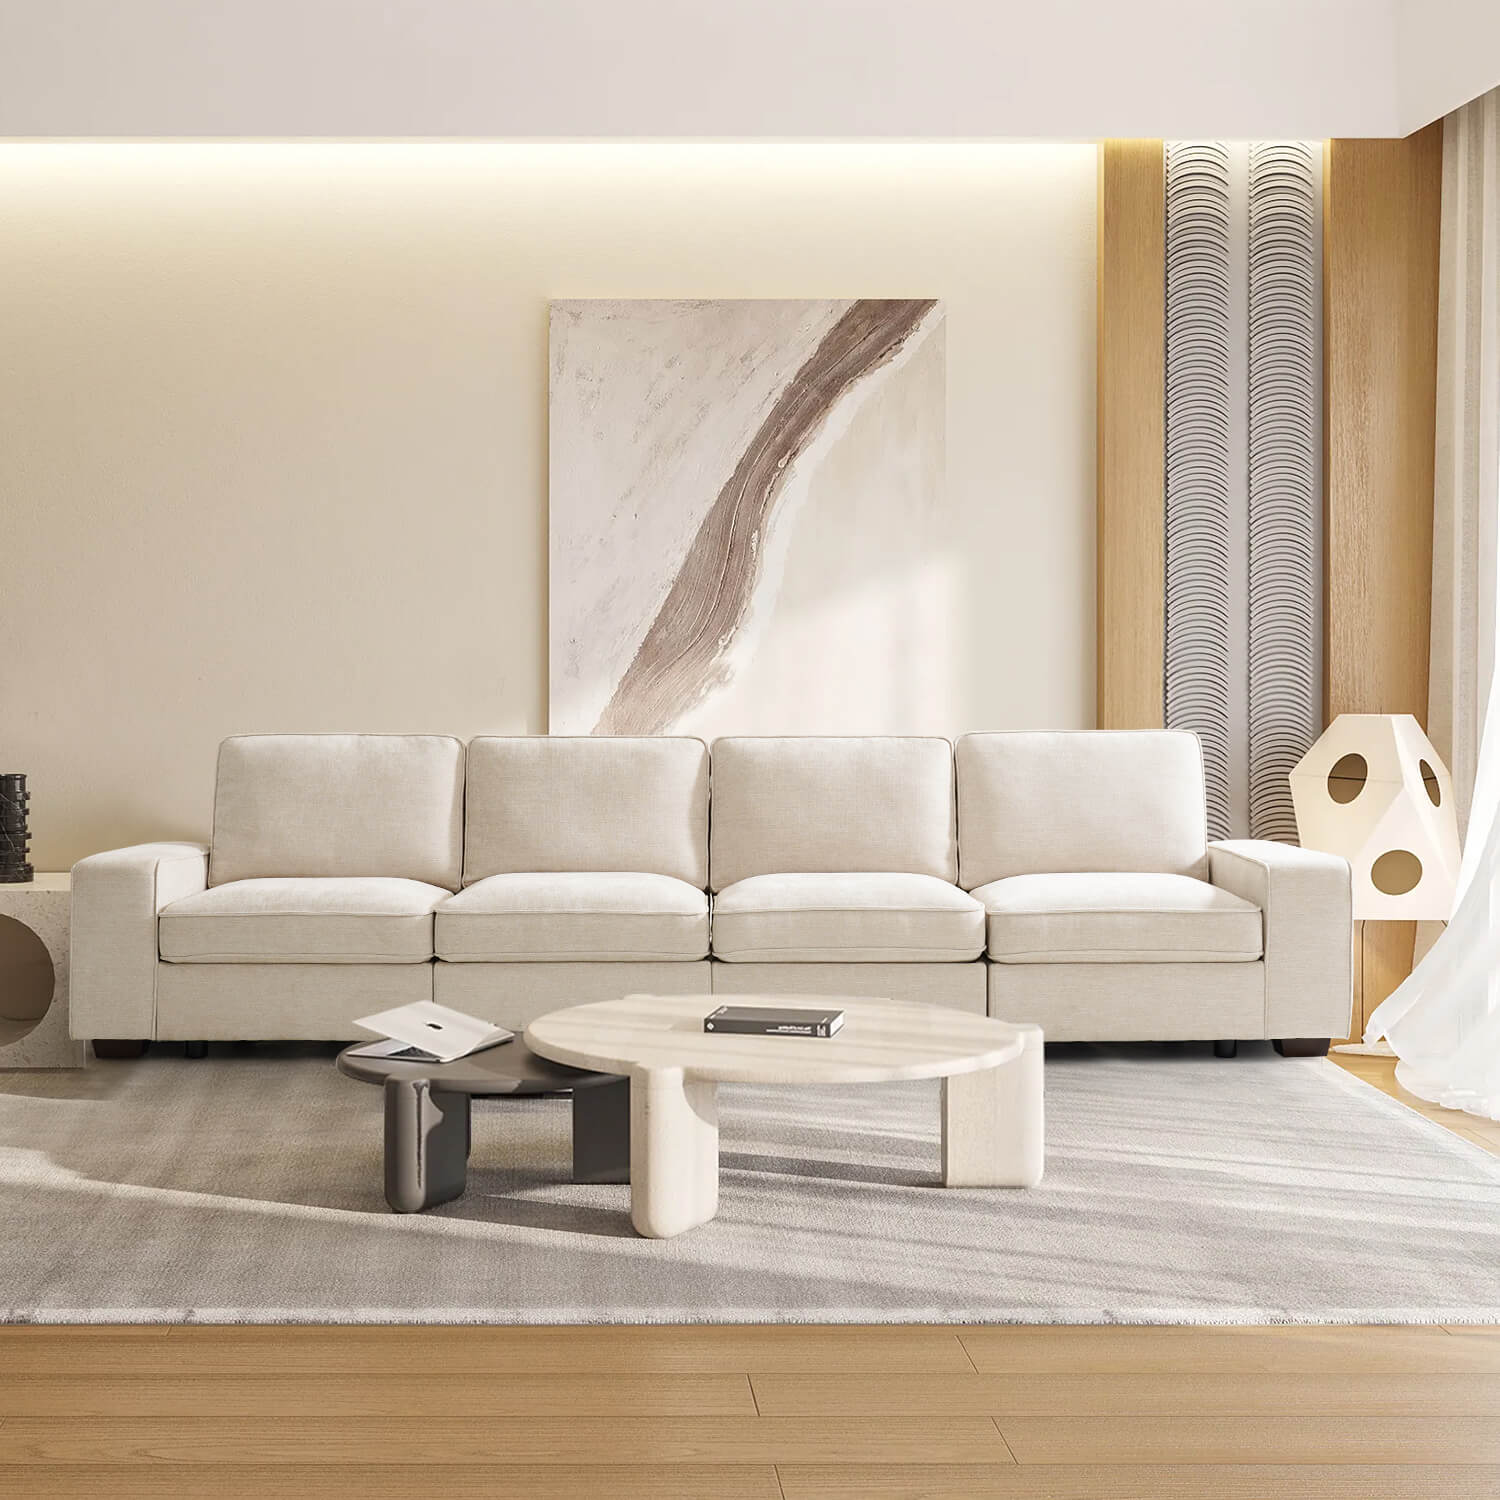 Modular Sectional Sofa for Living Room with Storage